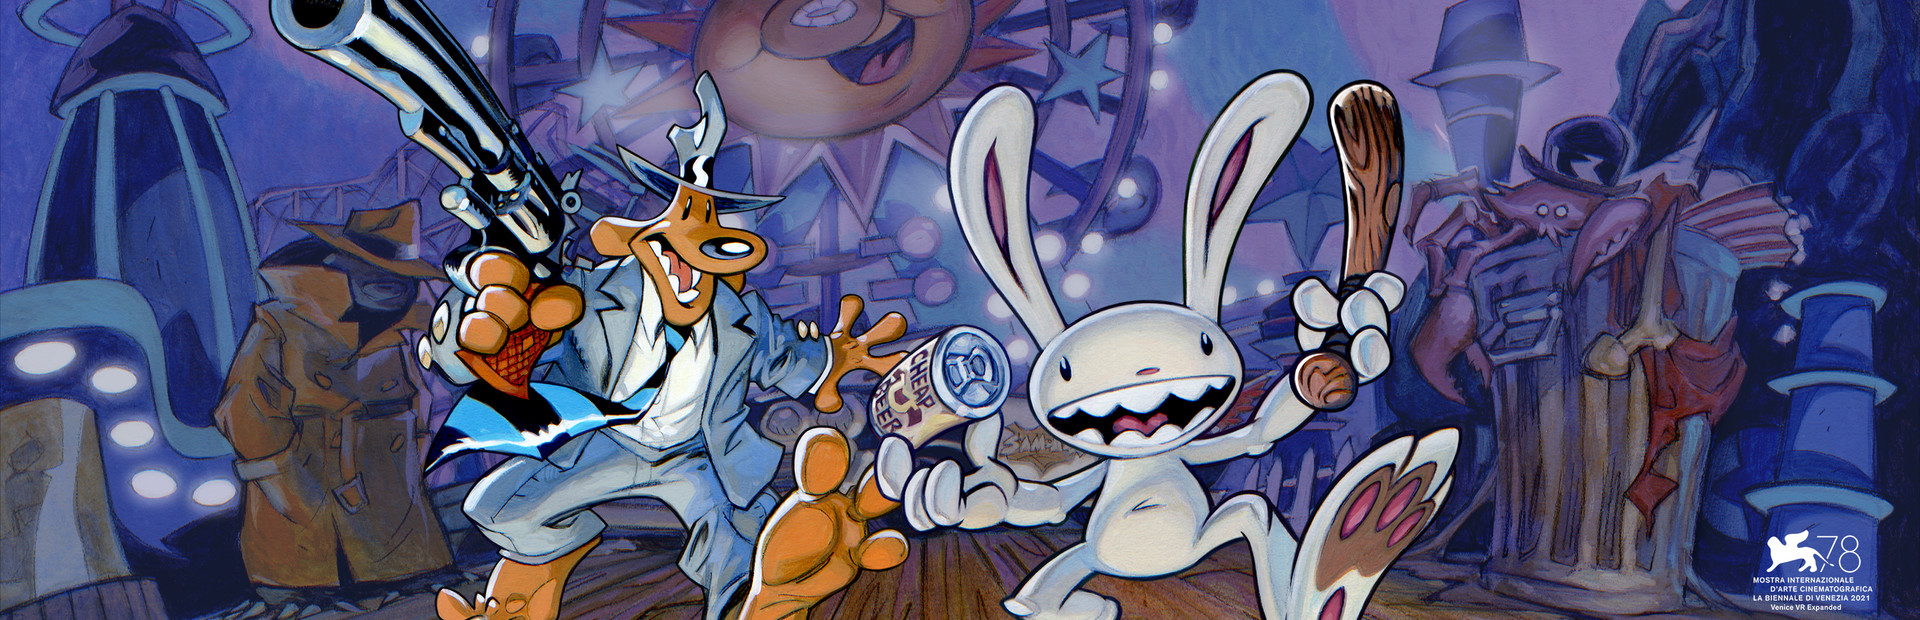 Sam & Max: This Time It's Virtual! cover image